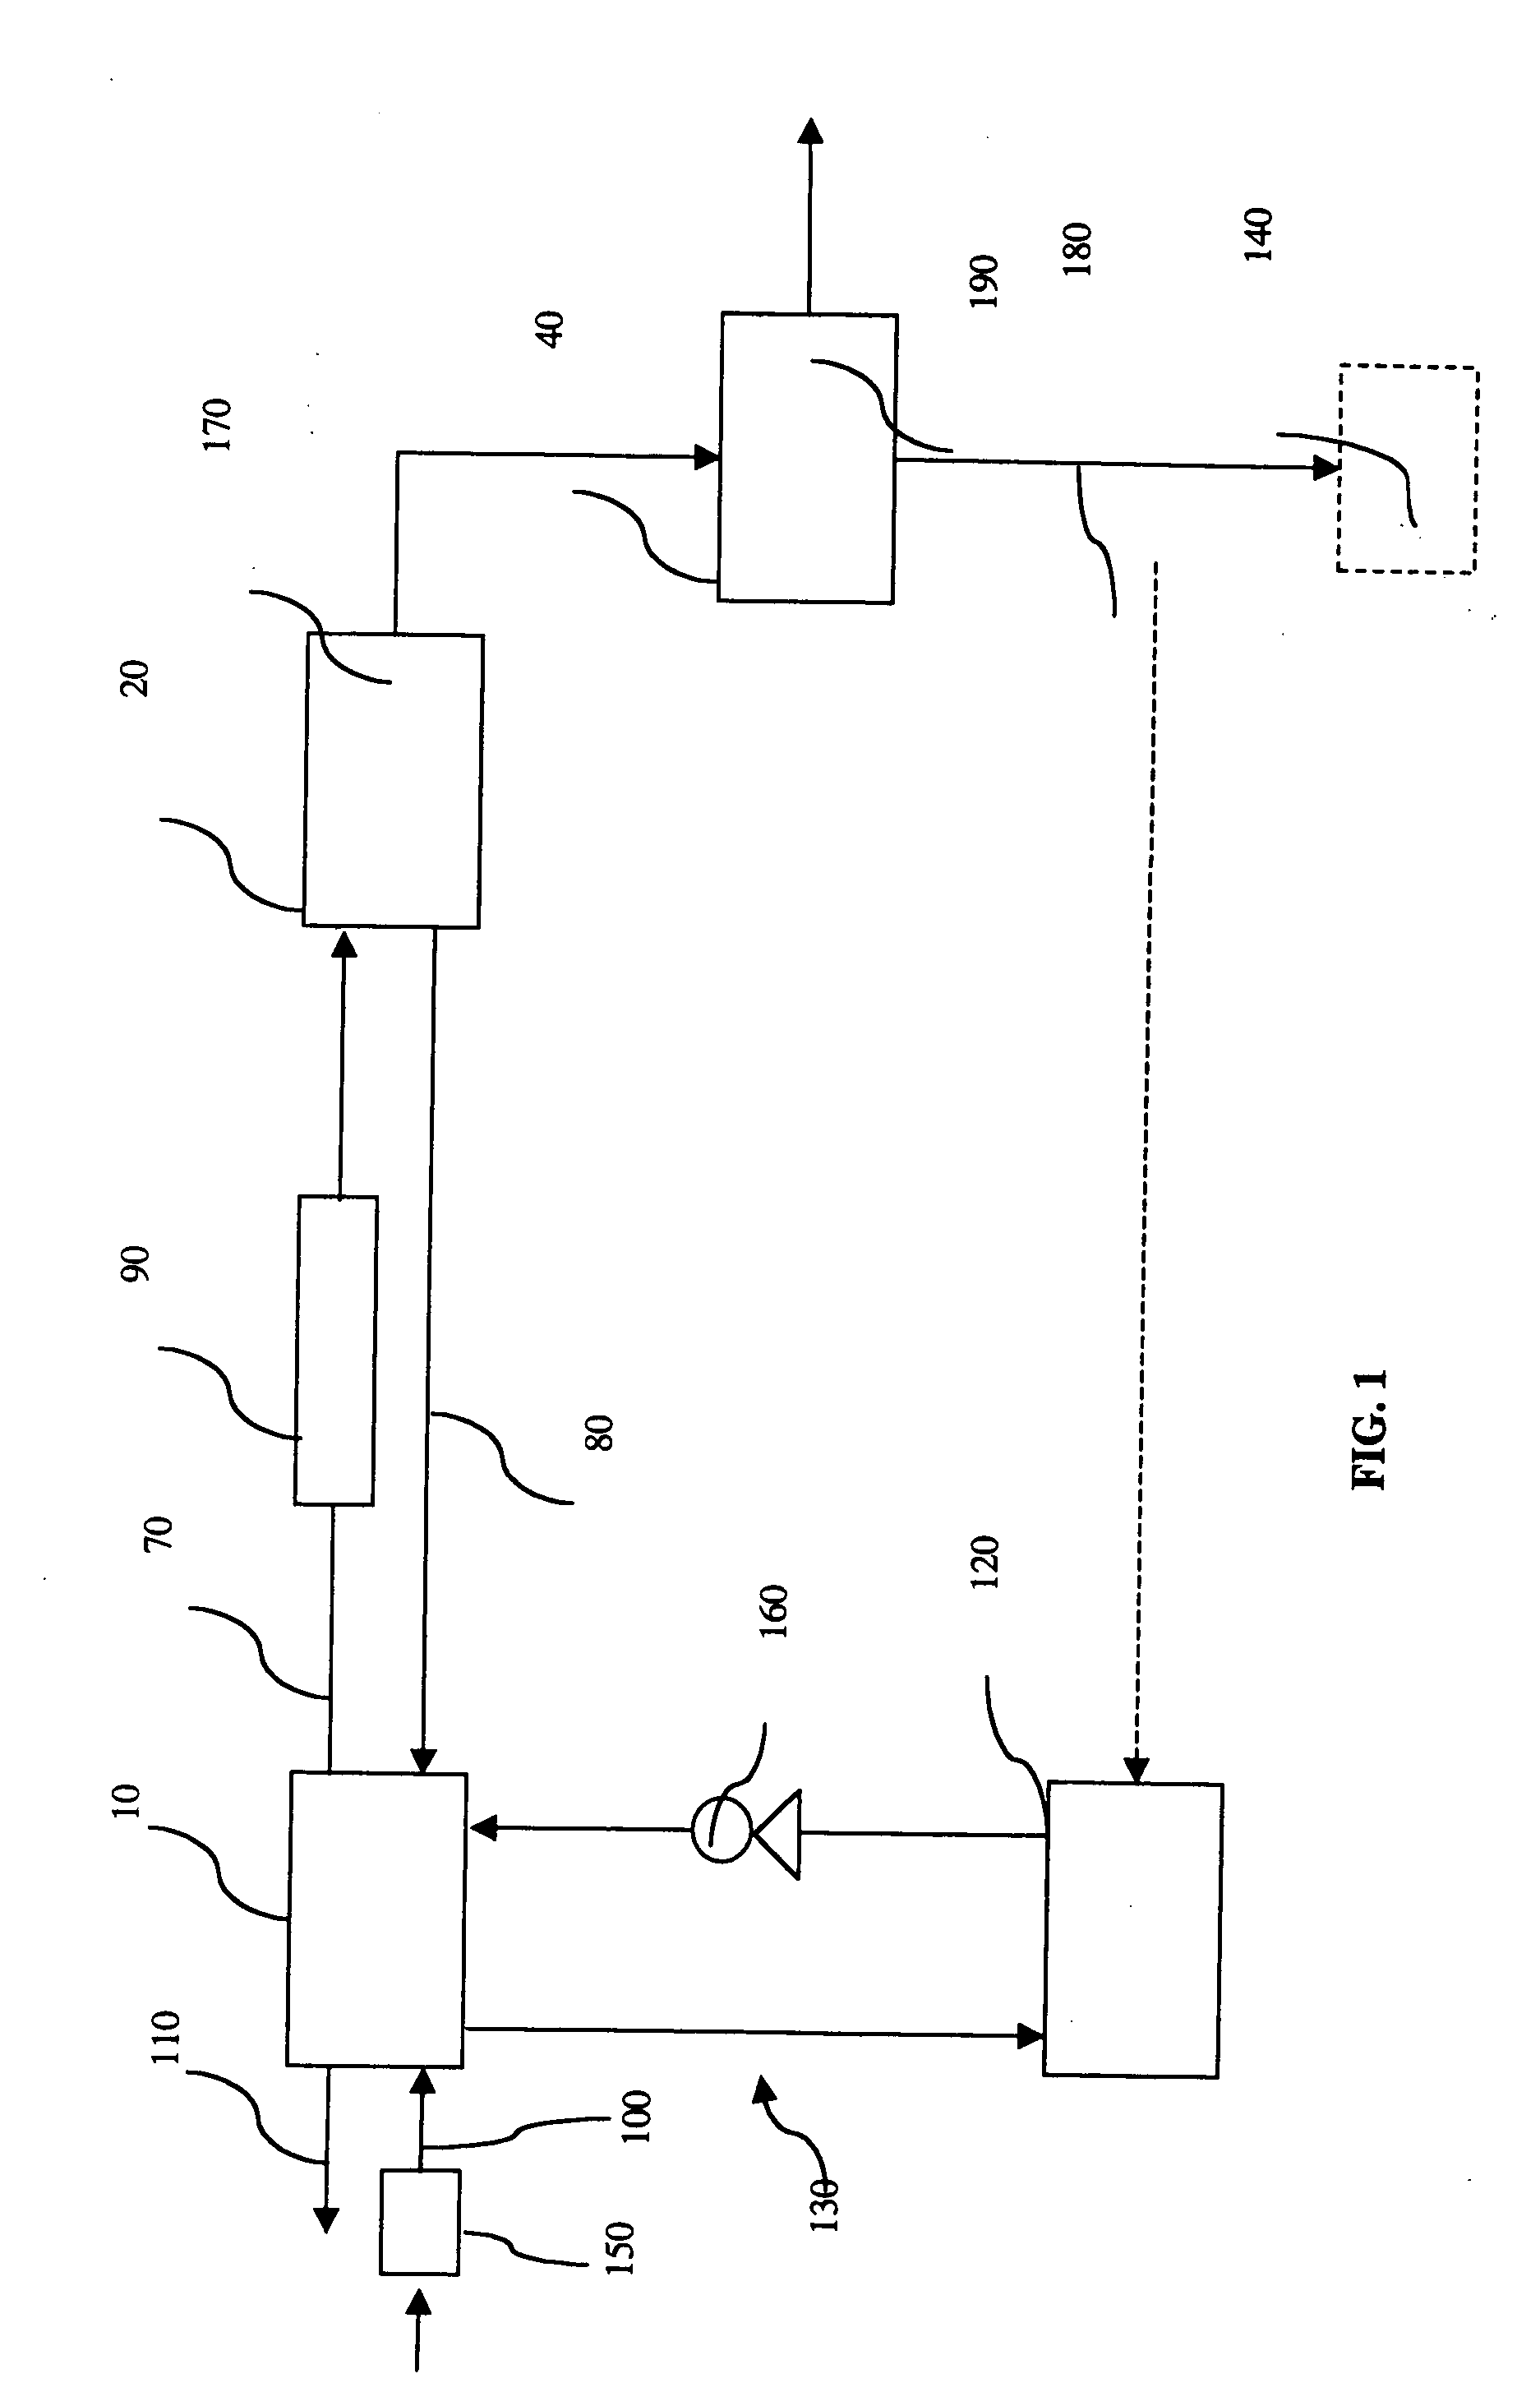 Hydrogen production and water recovery system for a fuel cell